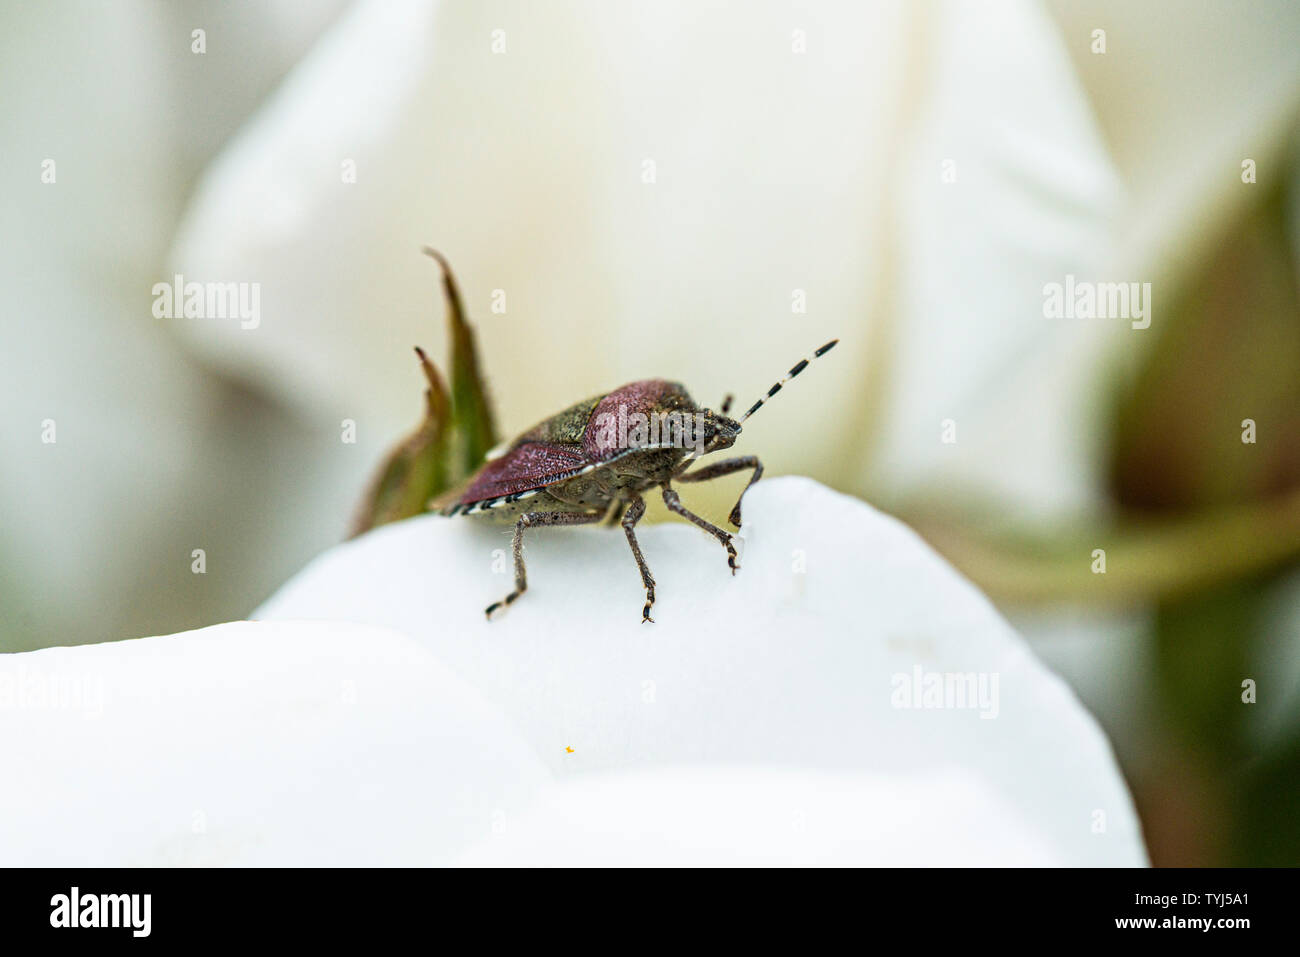 A hairy shield bug (Dolycoris baccarum) on a white rose Stock Photo